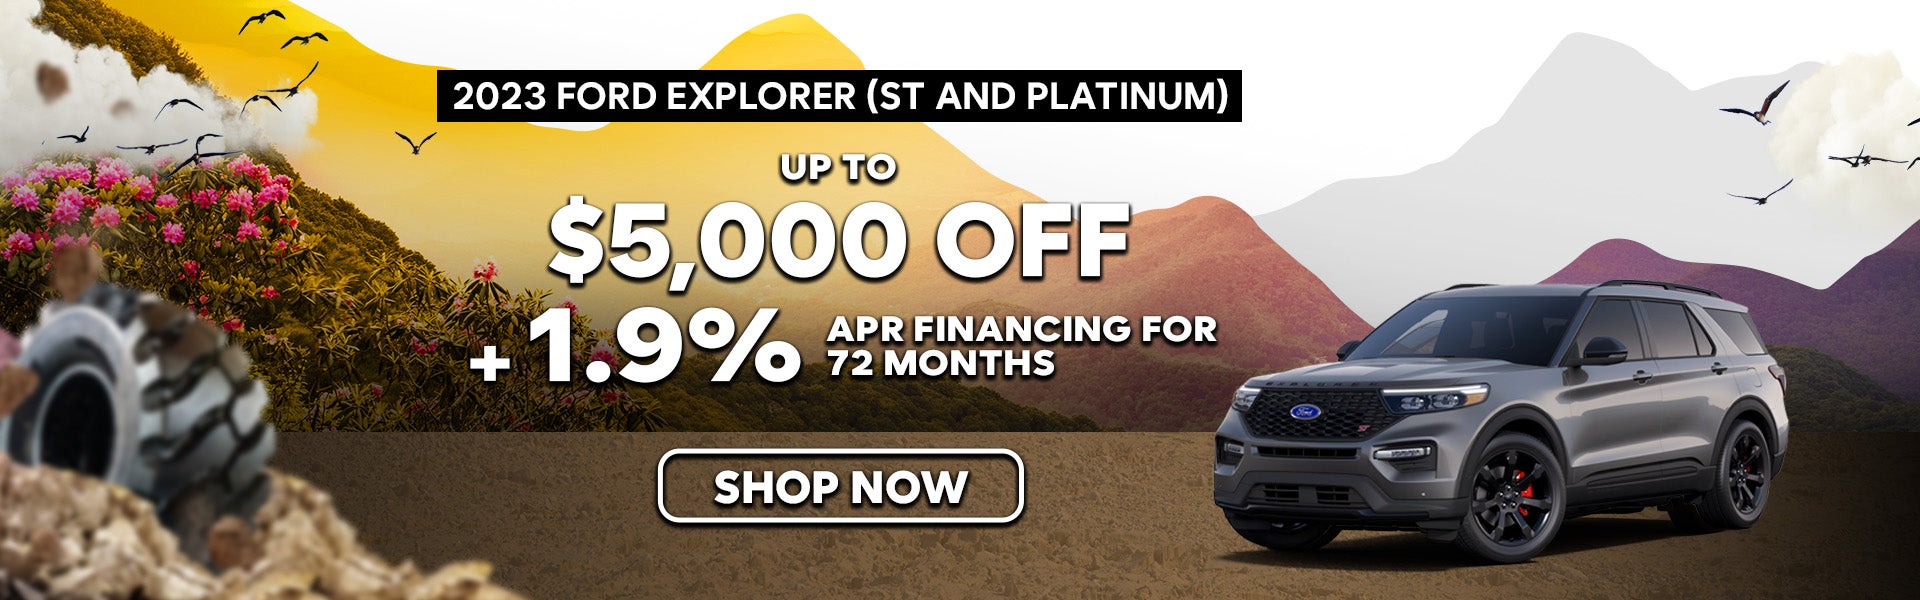 2023 Ford Explorer ST and Platinum Special Offer